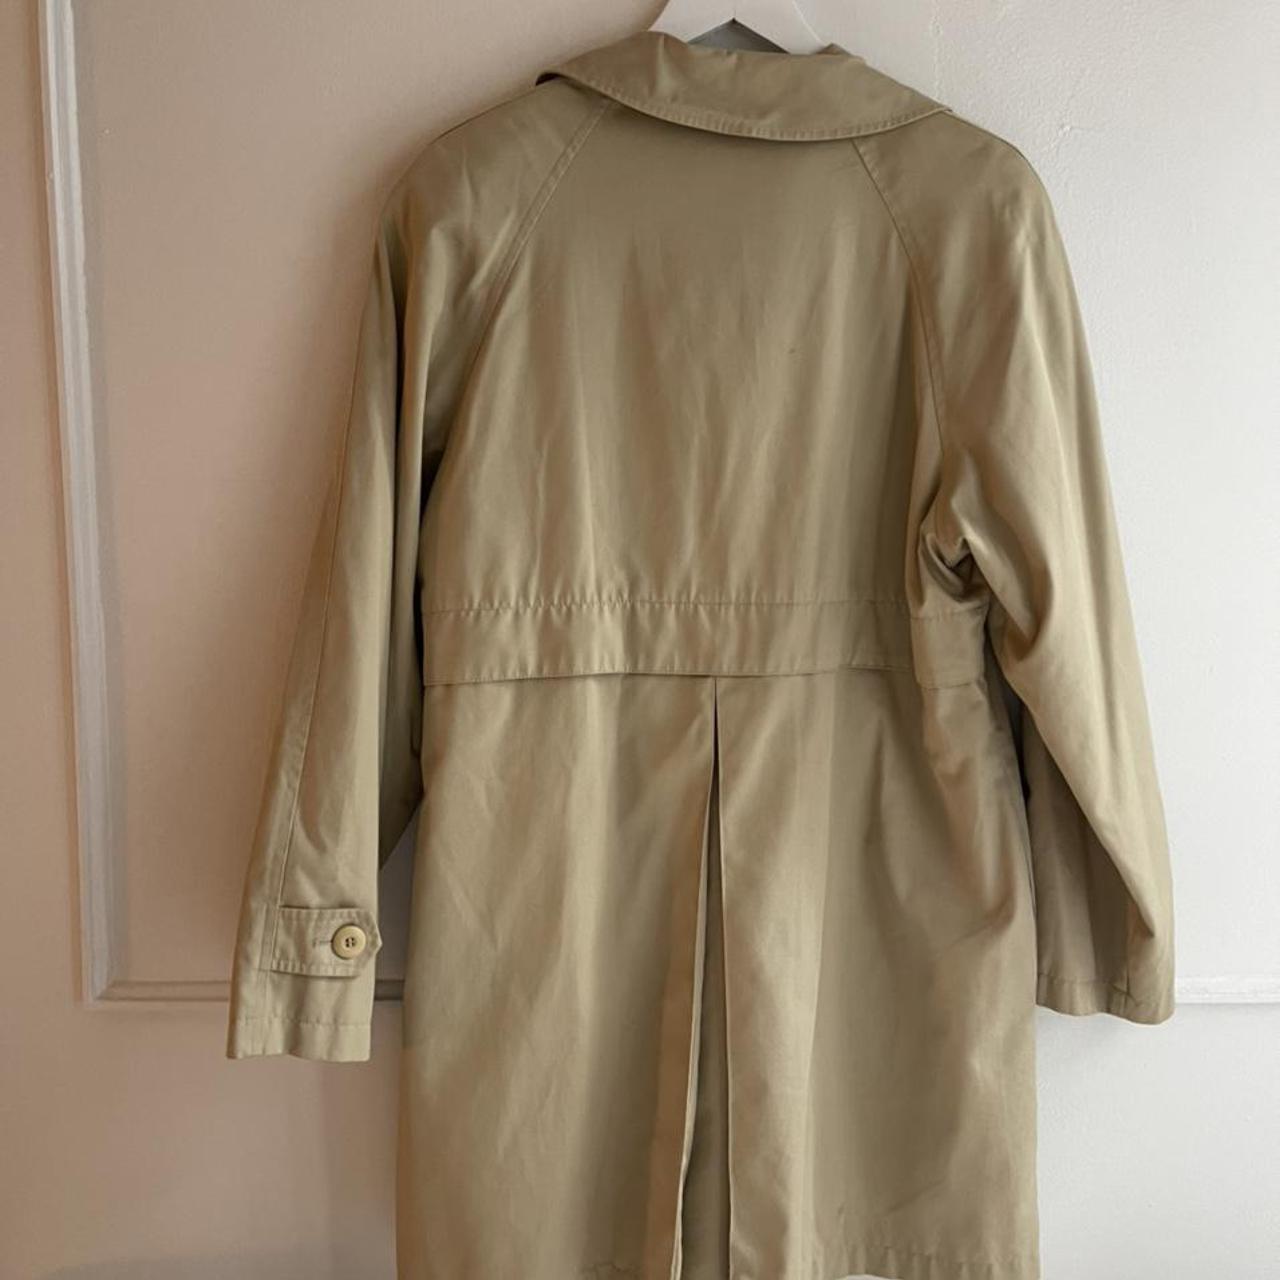 Product Image 2 - Vintage Trench Coat 

- Marked